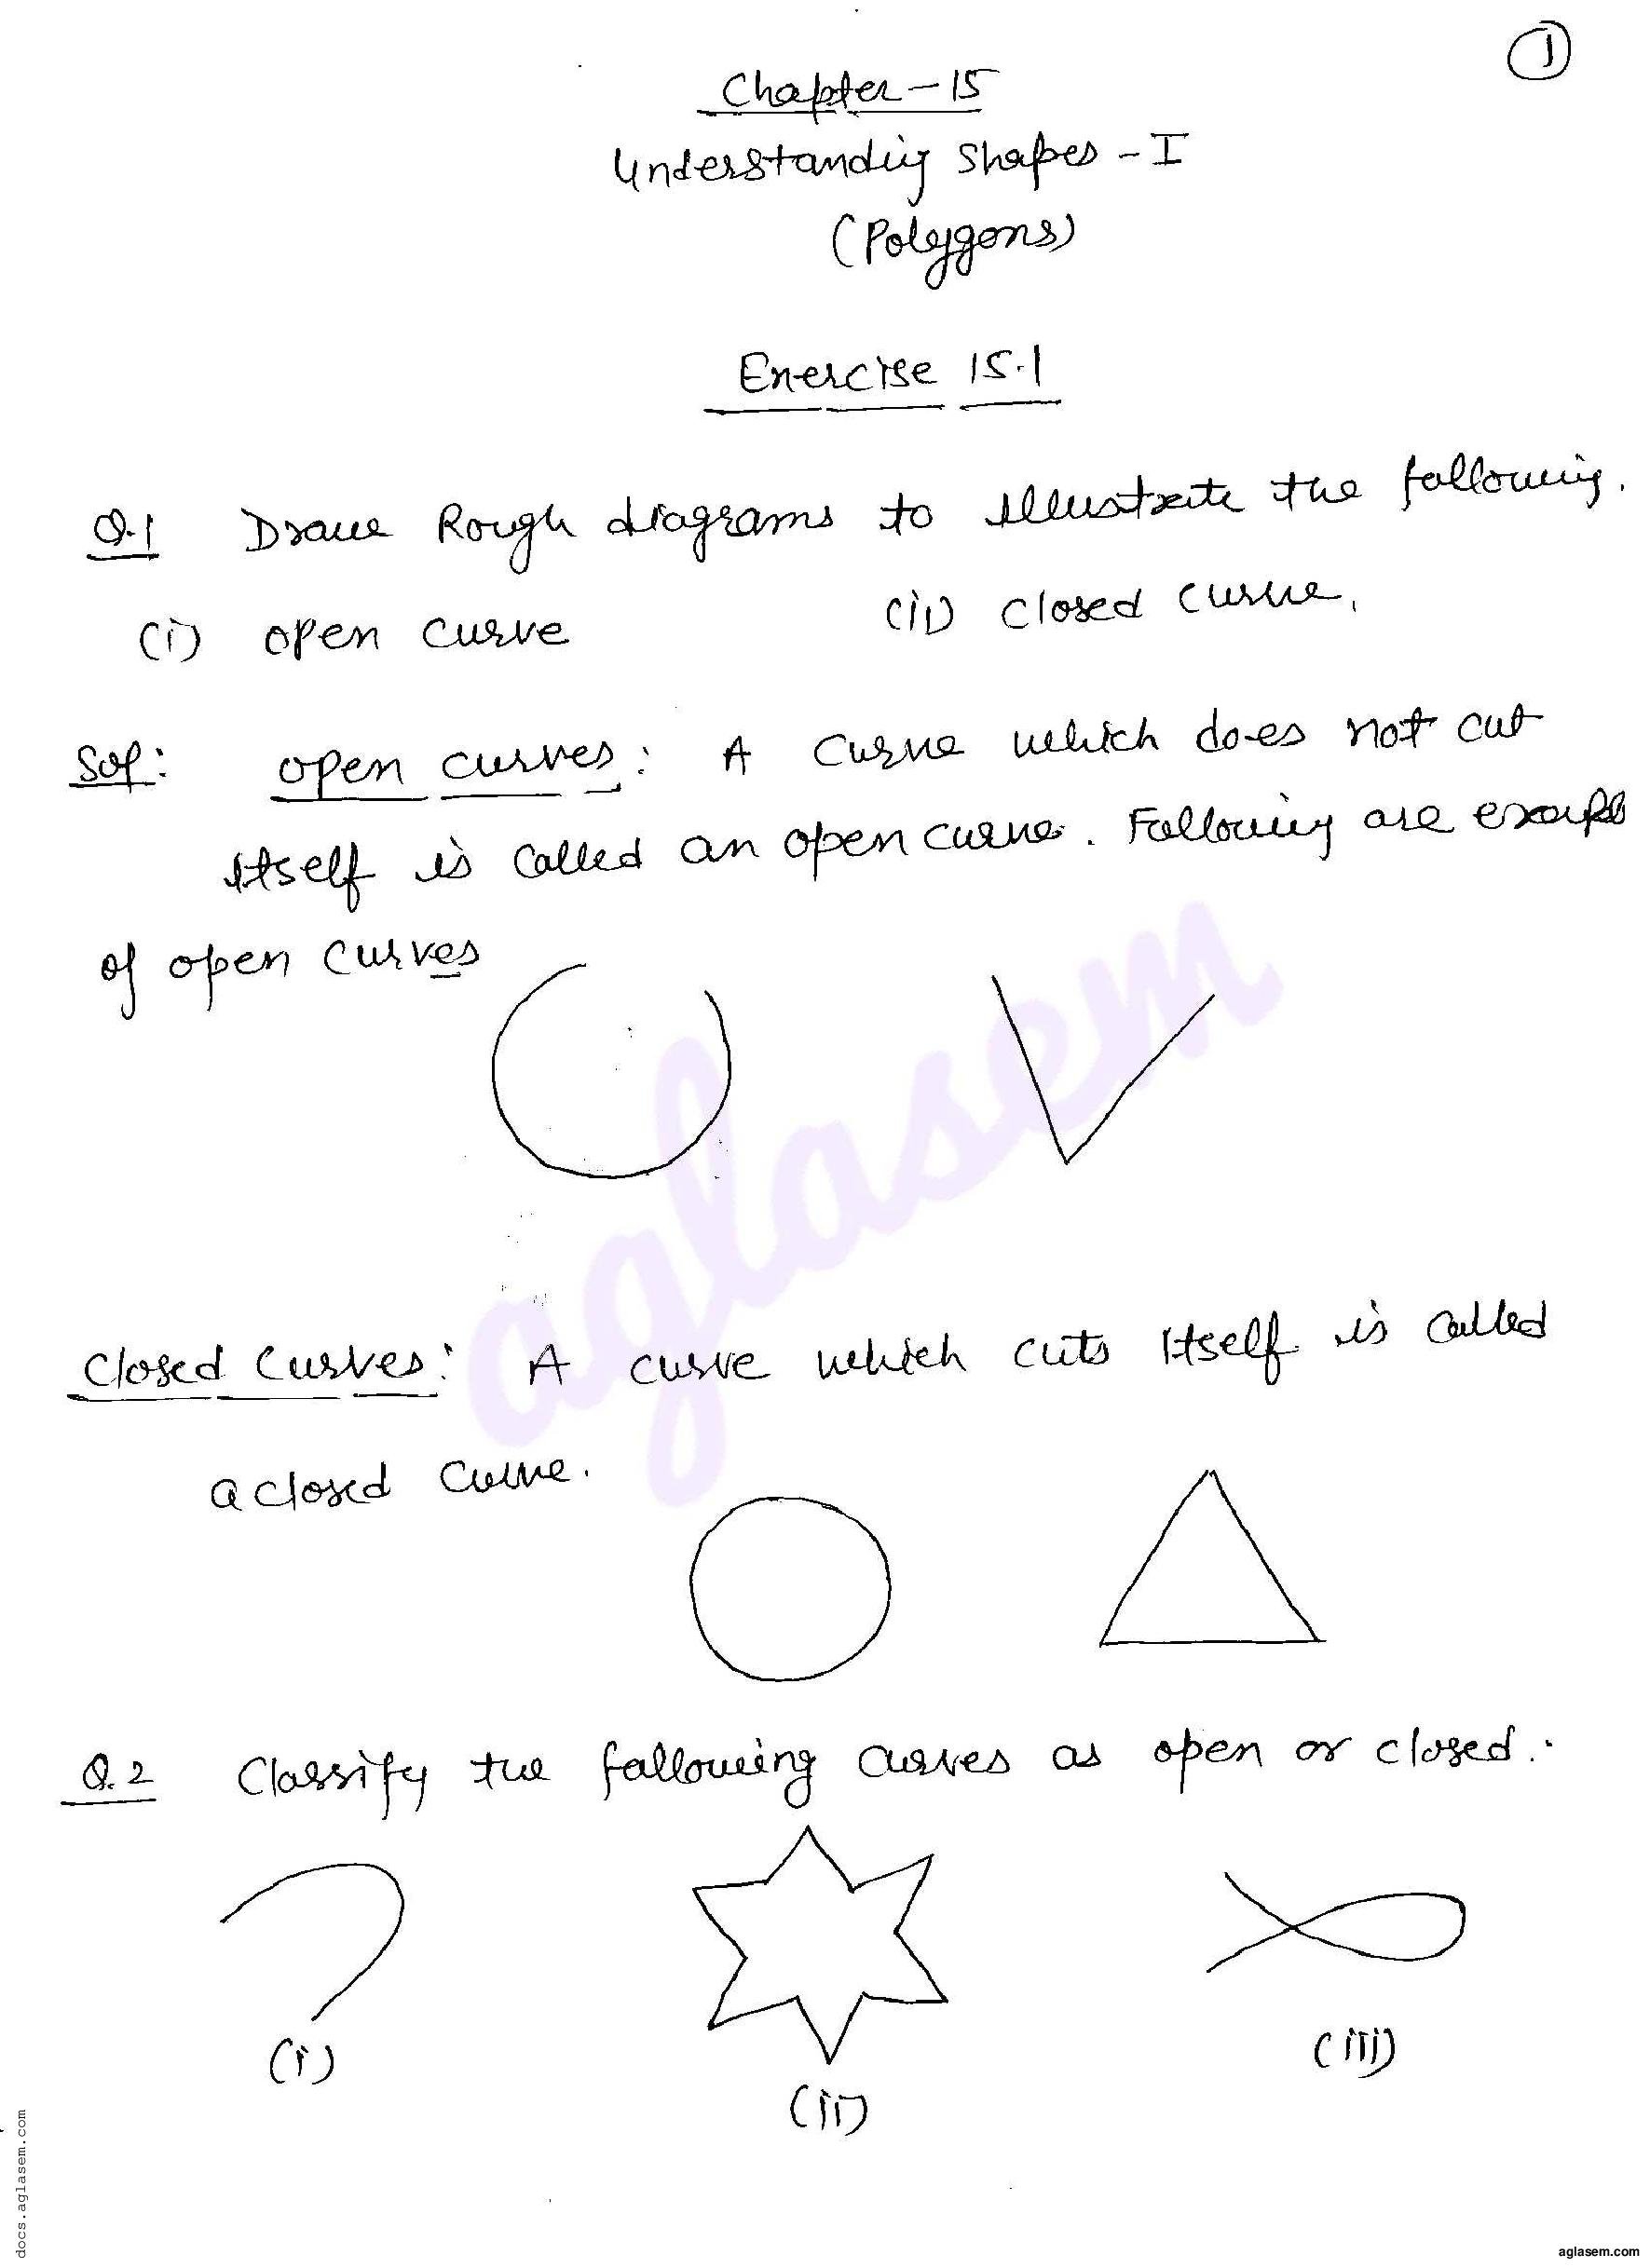 RD Sharma Solutions Class 8 Chapter 15 Understanding Shapes I Polygons Exercise 15.1 - Page 1